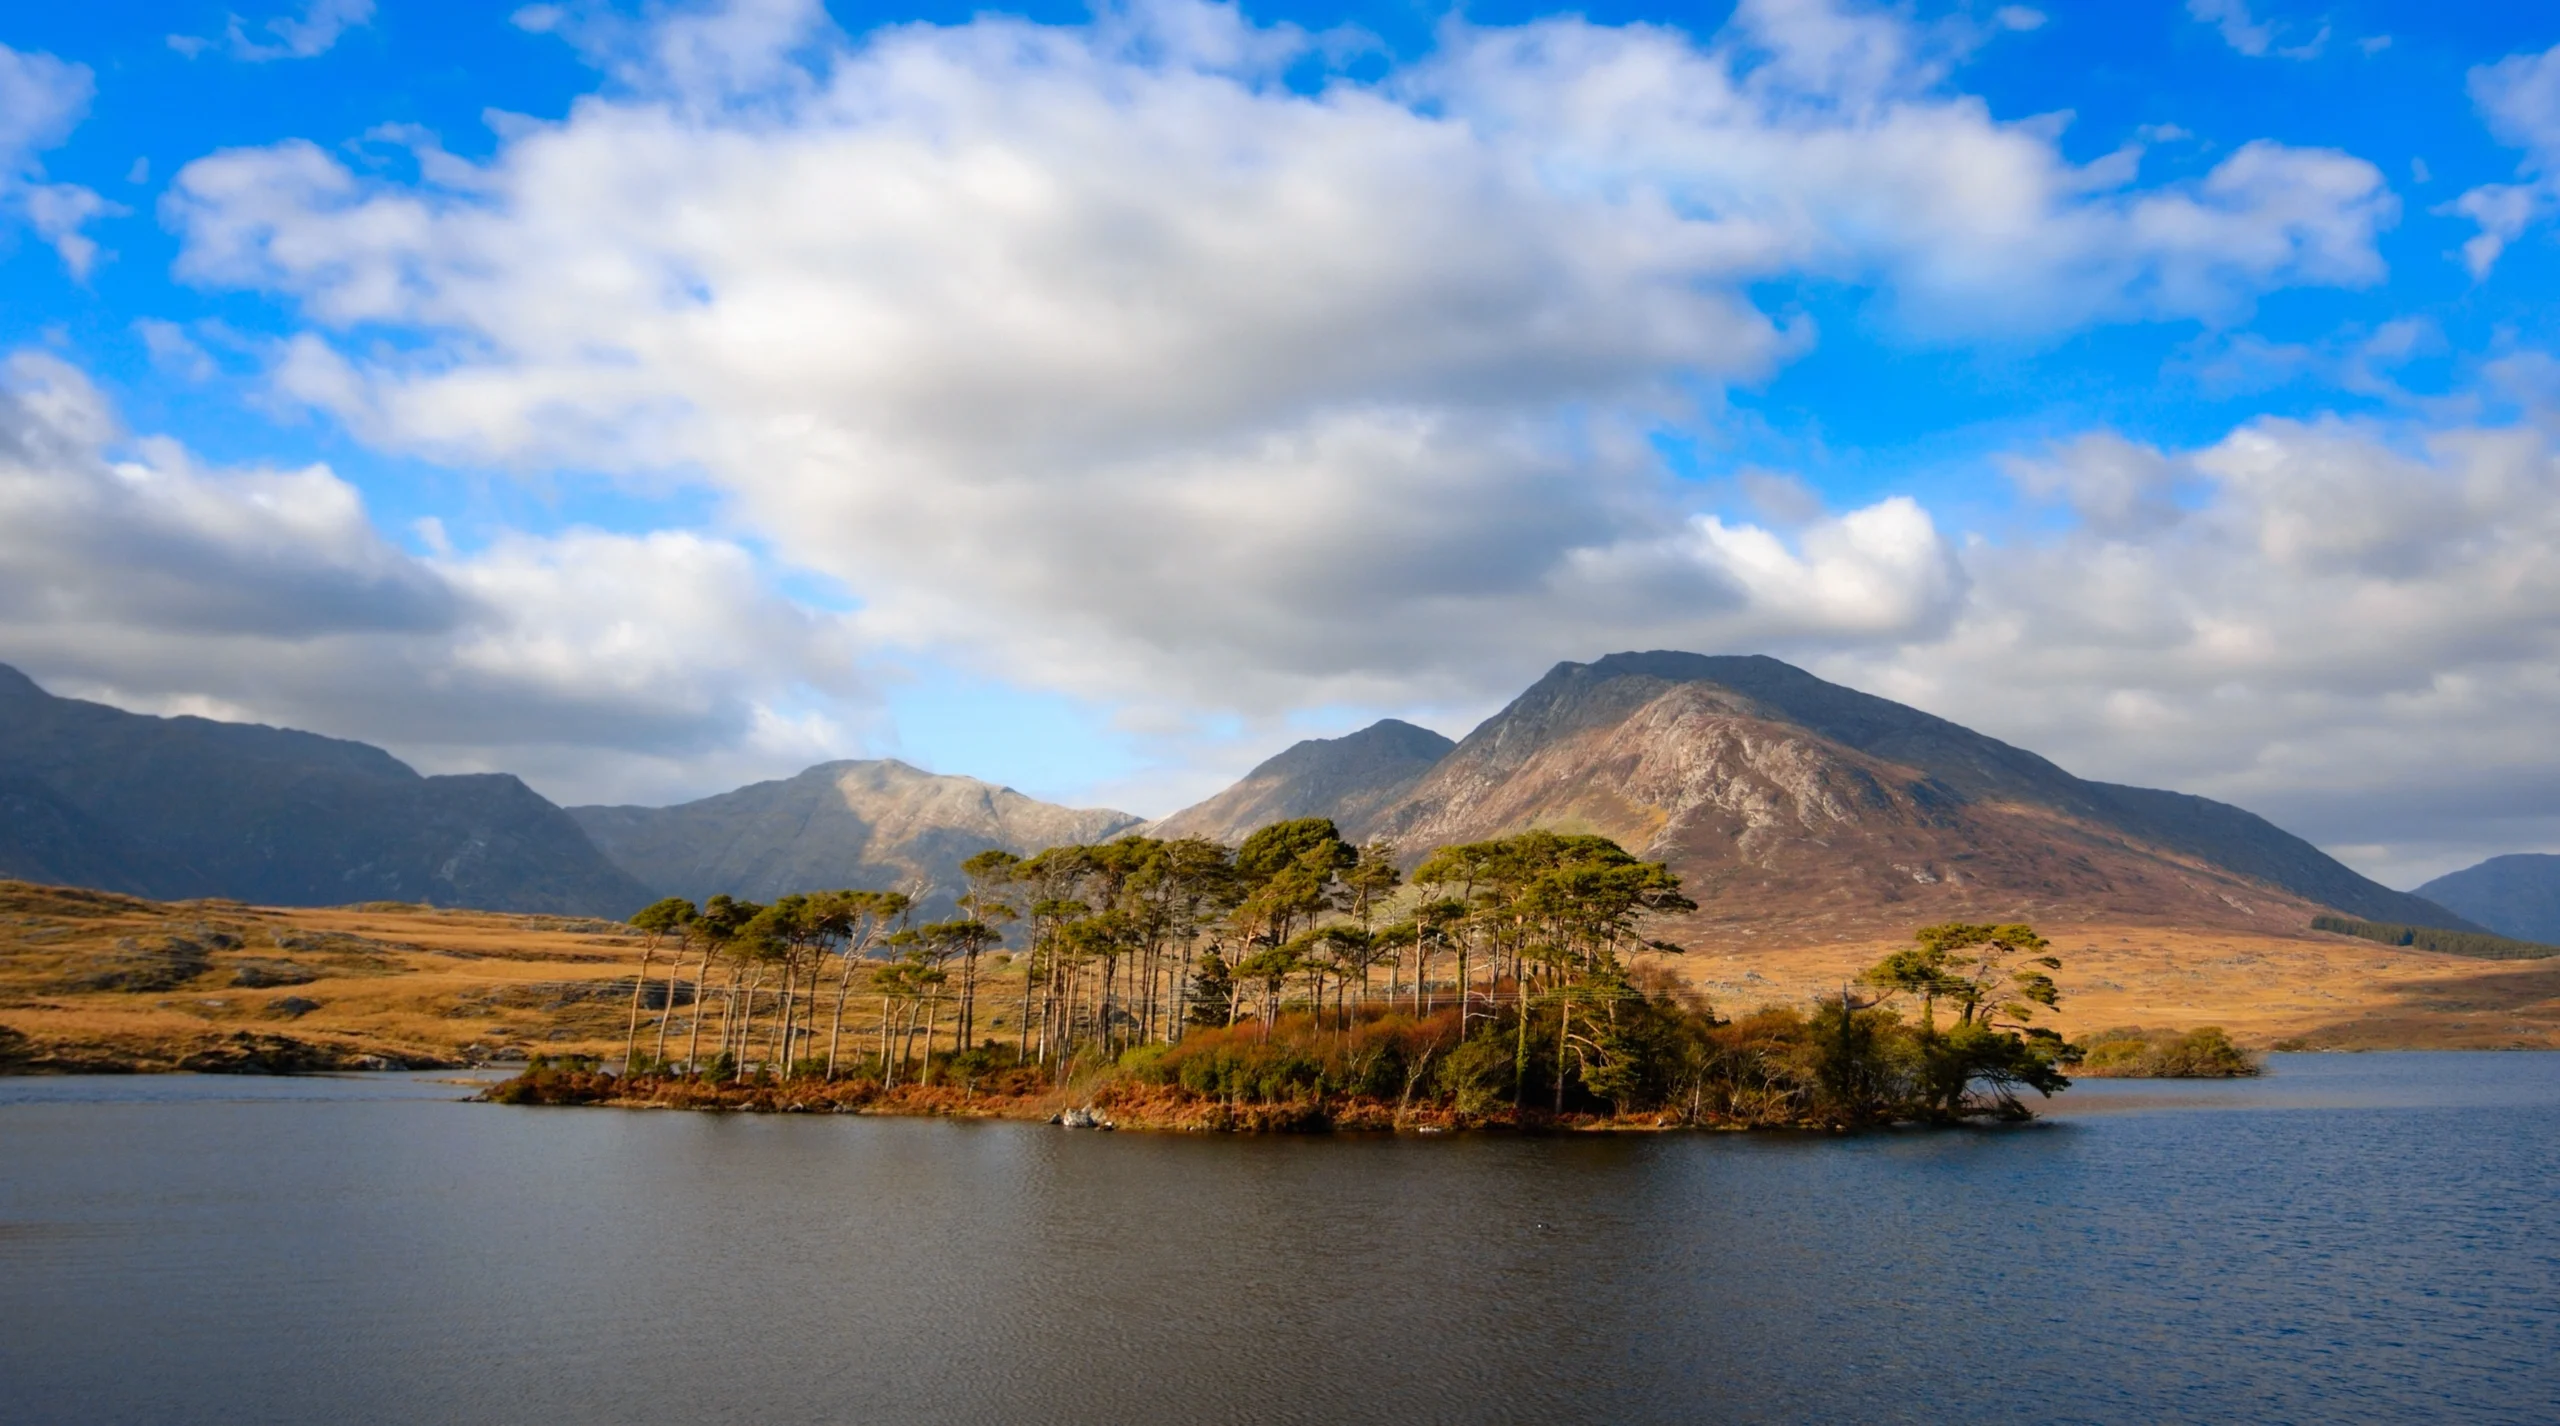 Connemara holiday homes, landscape with mountains and sky reflected in lake, Ireland